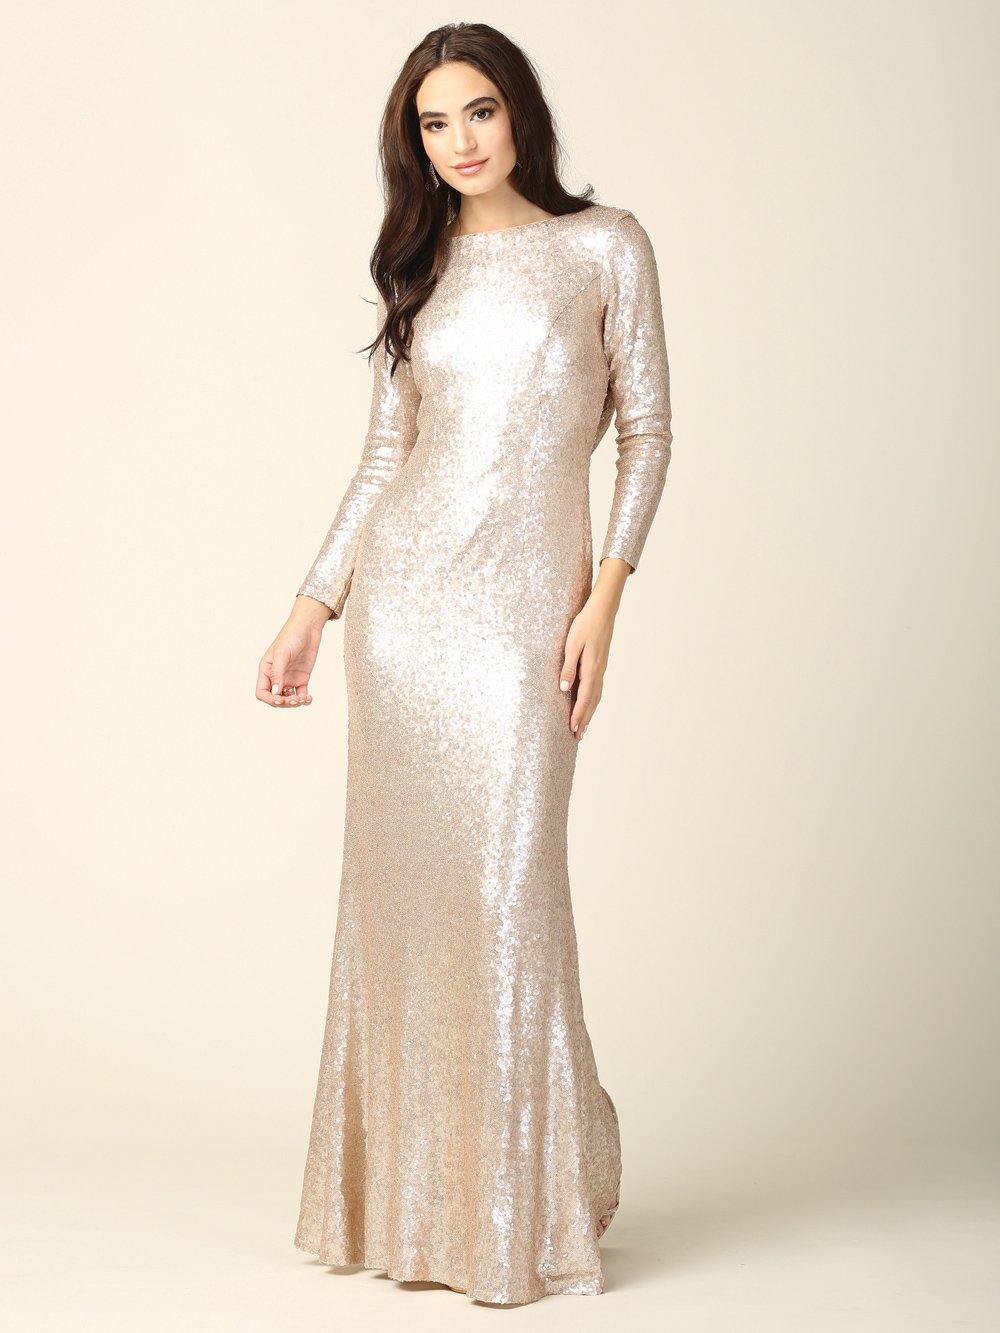 Long Sleeve Formal Evening Prom Dress - The Dress Outlet Eva Fashion